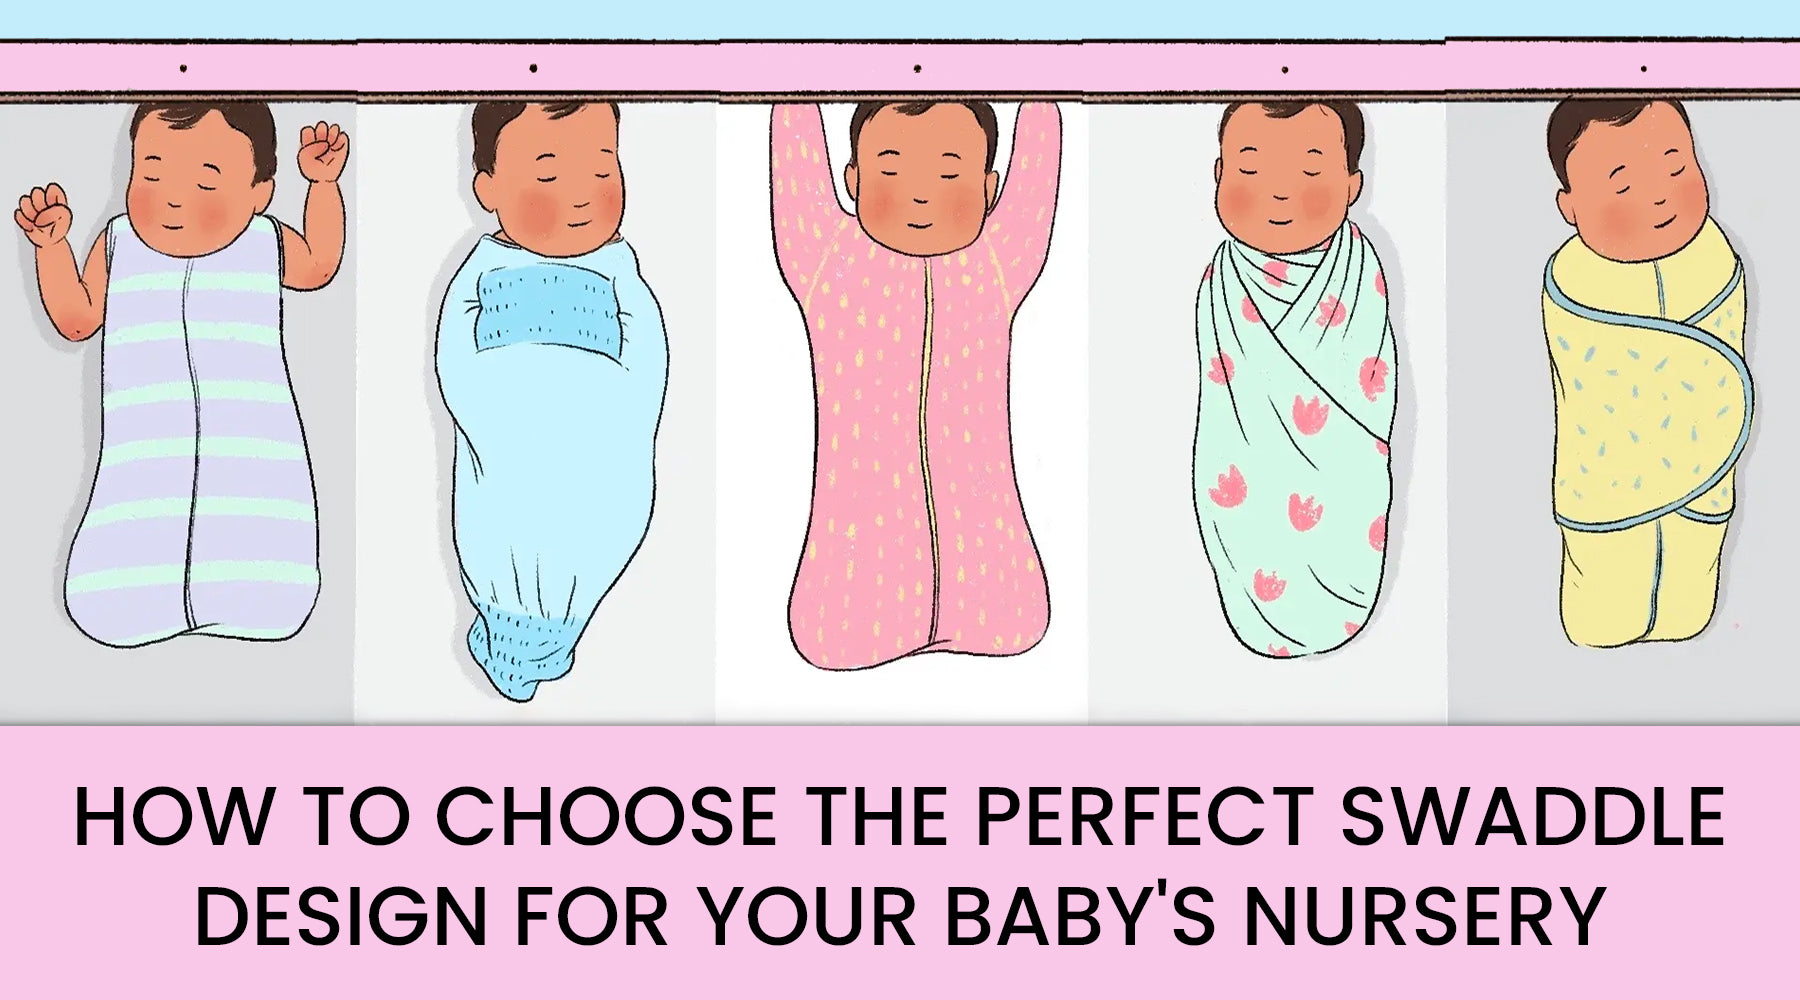 How to Choose the Perfect Swaddle Design for Your Baby's Nursery